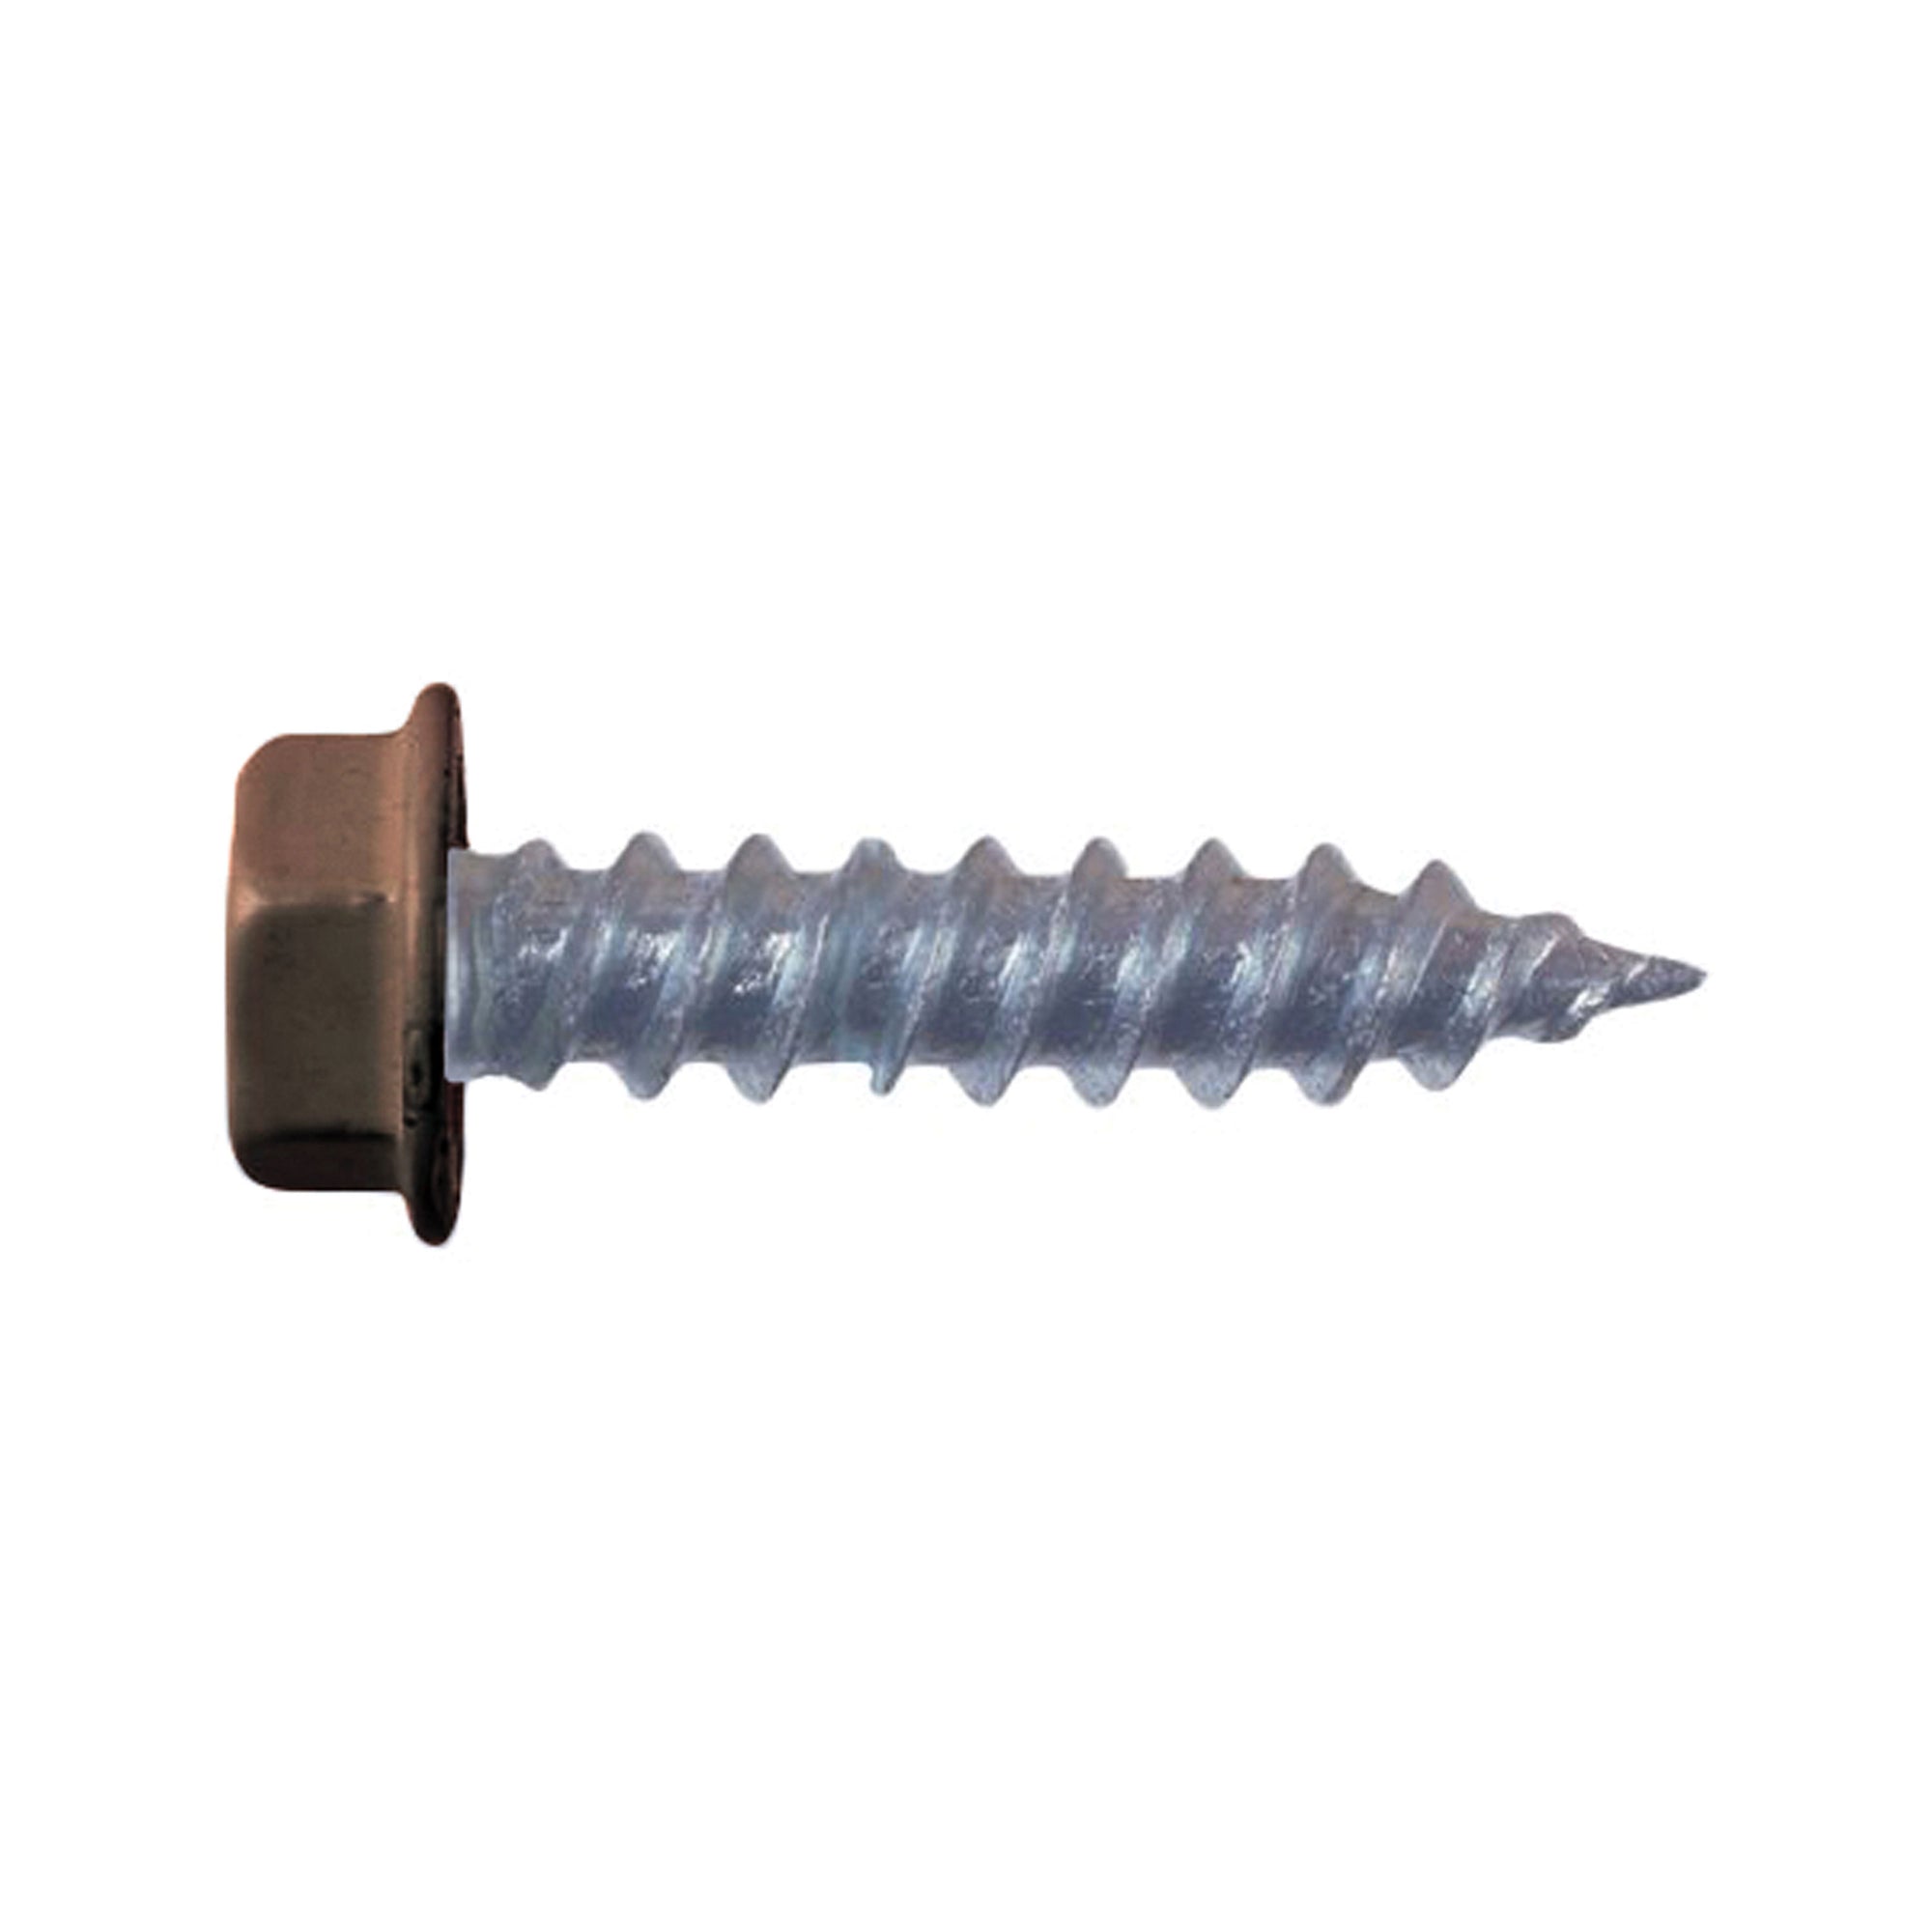 AP Products 012-TR1000 BR 8 X 1-1/4 MH/RV Unslotted Hex Washer Head Screw, Pack of 1000 - 1-1/4", Brown